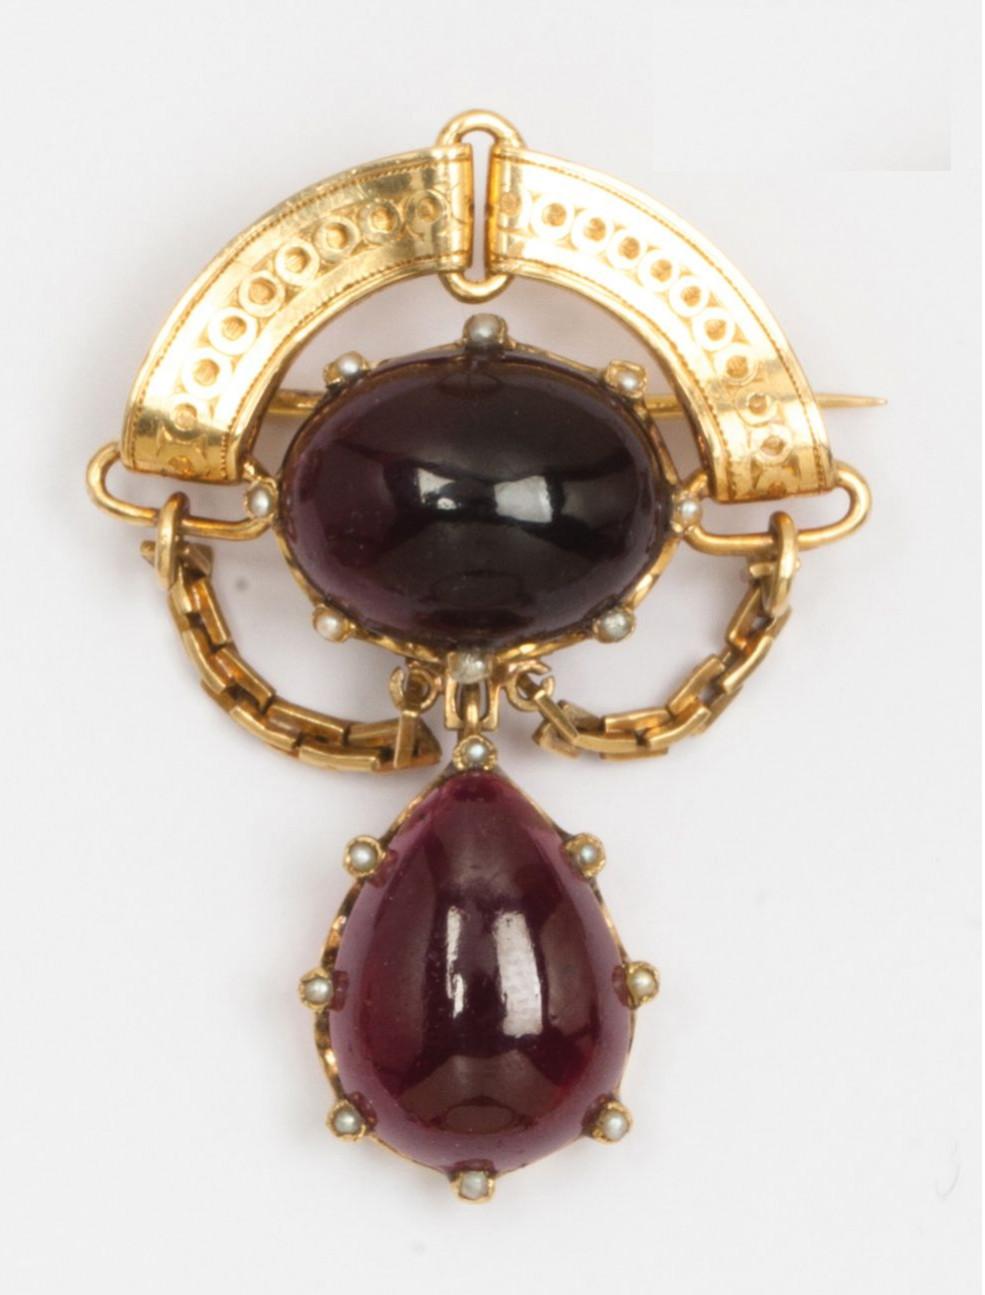 Yellow gold brooch, adorned with two large cabochons of garnets surrounded by seed pearls underlined with a frieze and chains. Dimensions: 5.2 x 3.8 cm
Weight: 17.2g. 